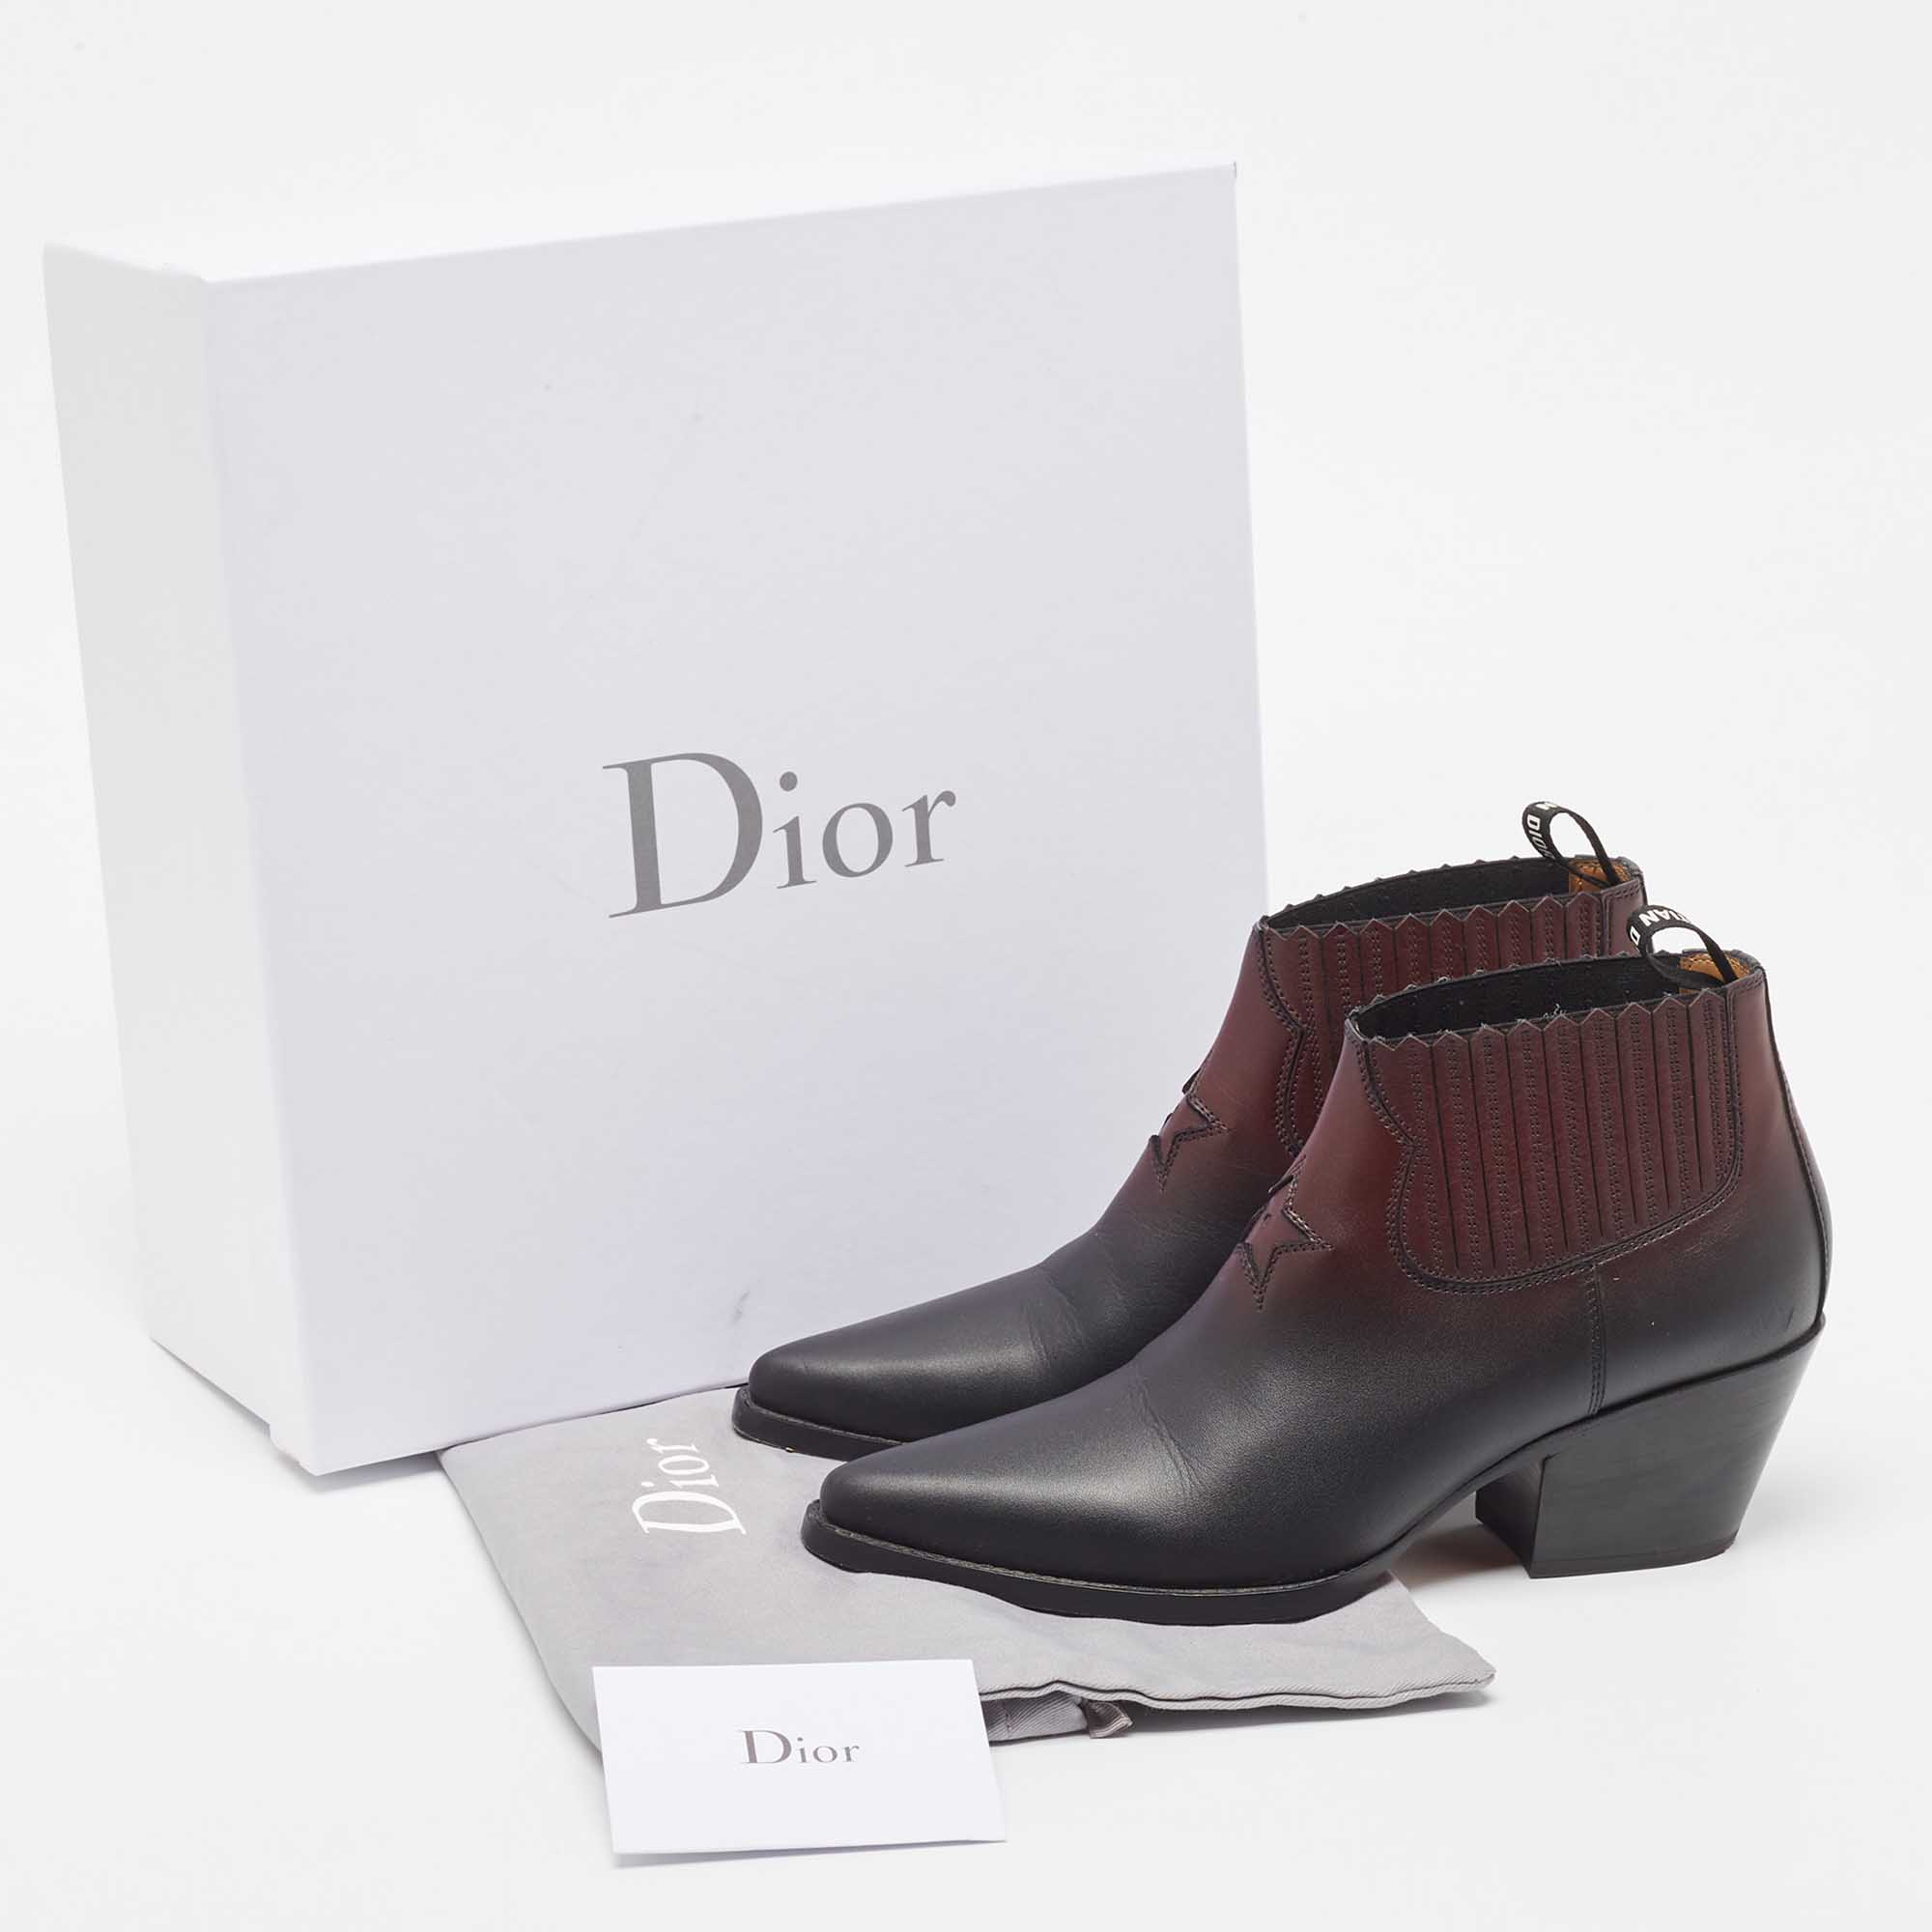 Dior Black/Burgundy Leather Dior L.A Ankle Boots Size 38